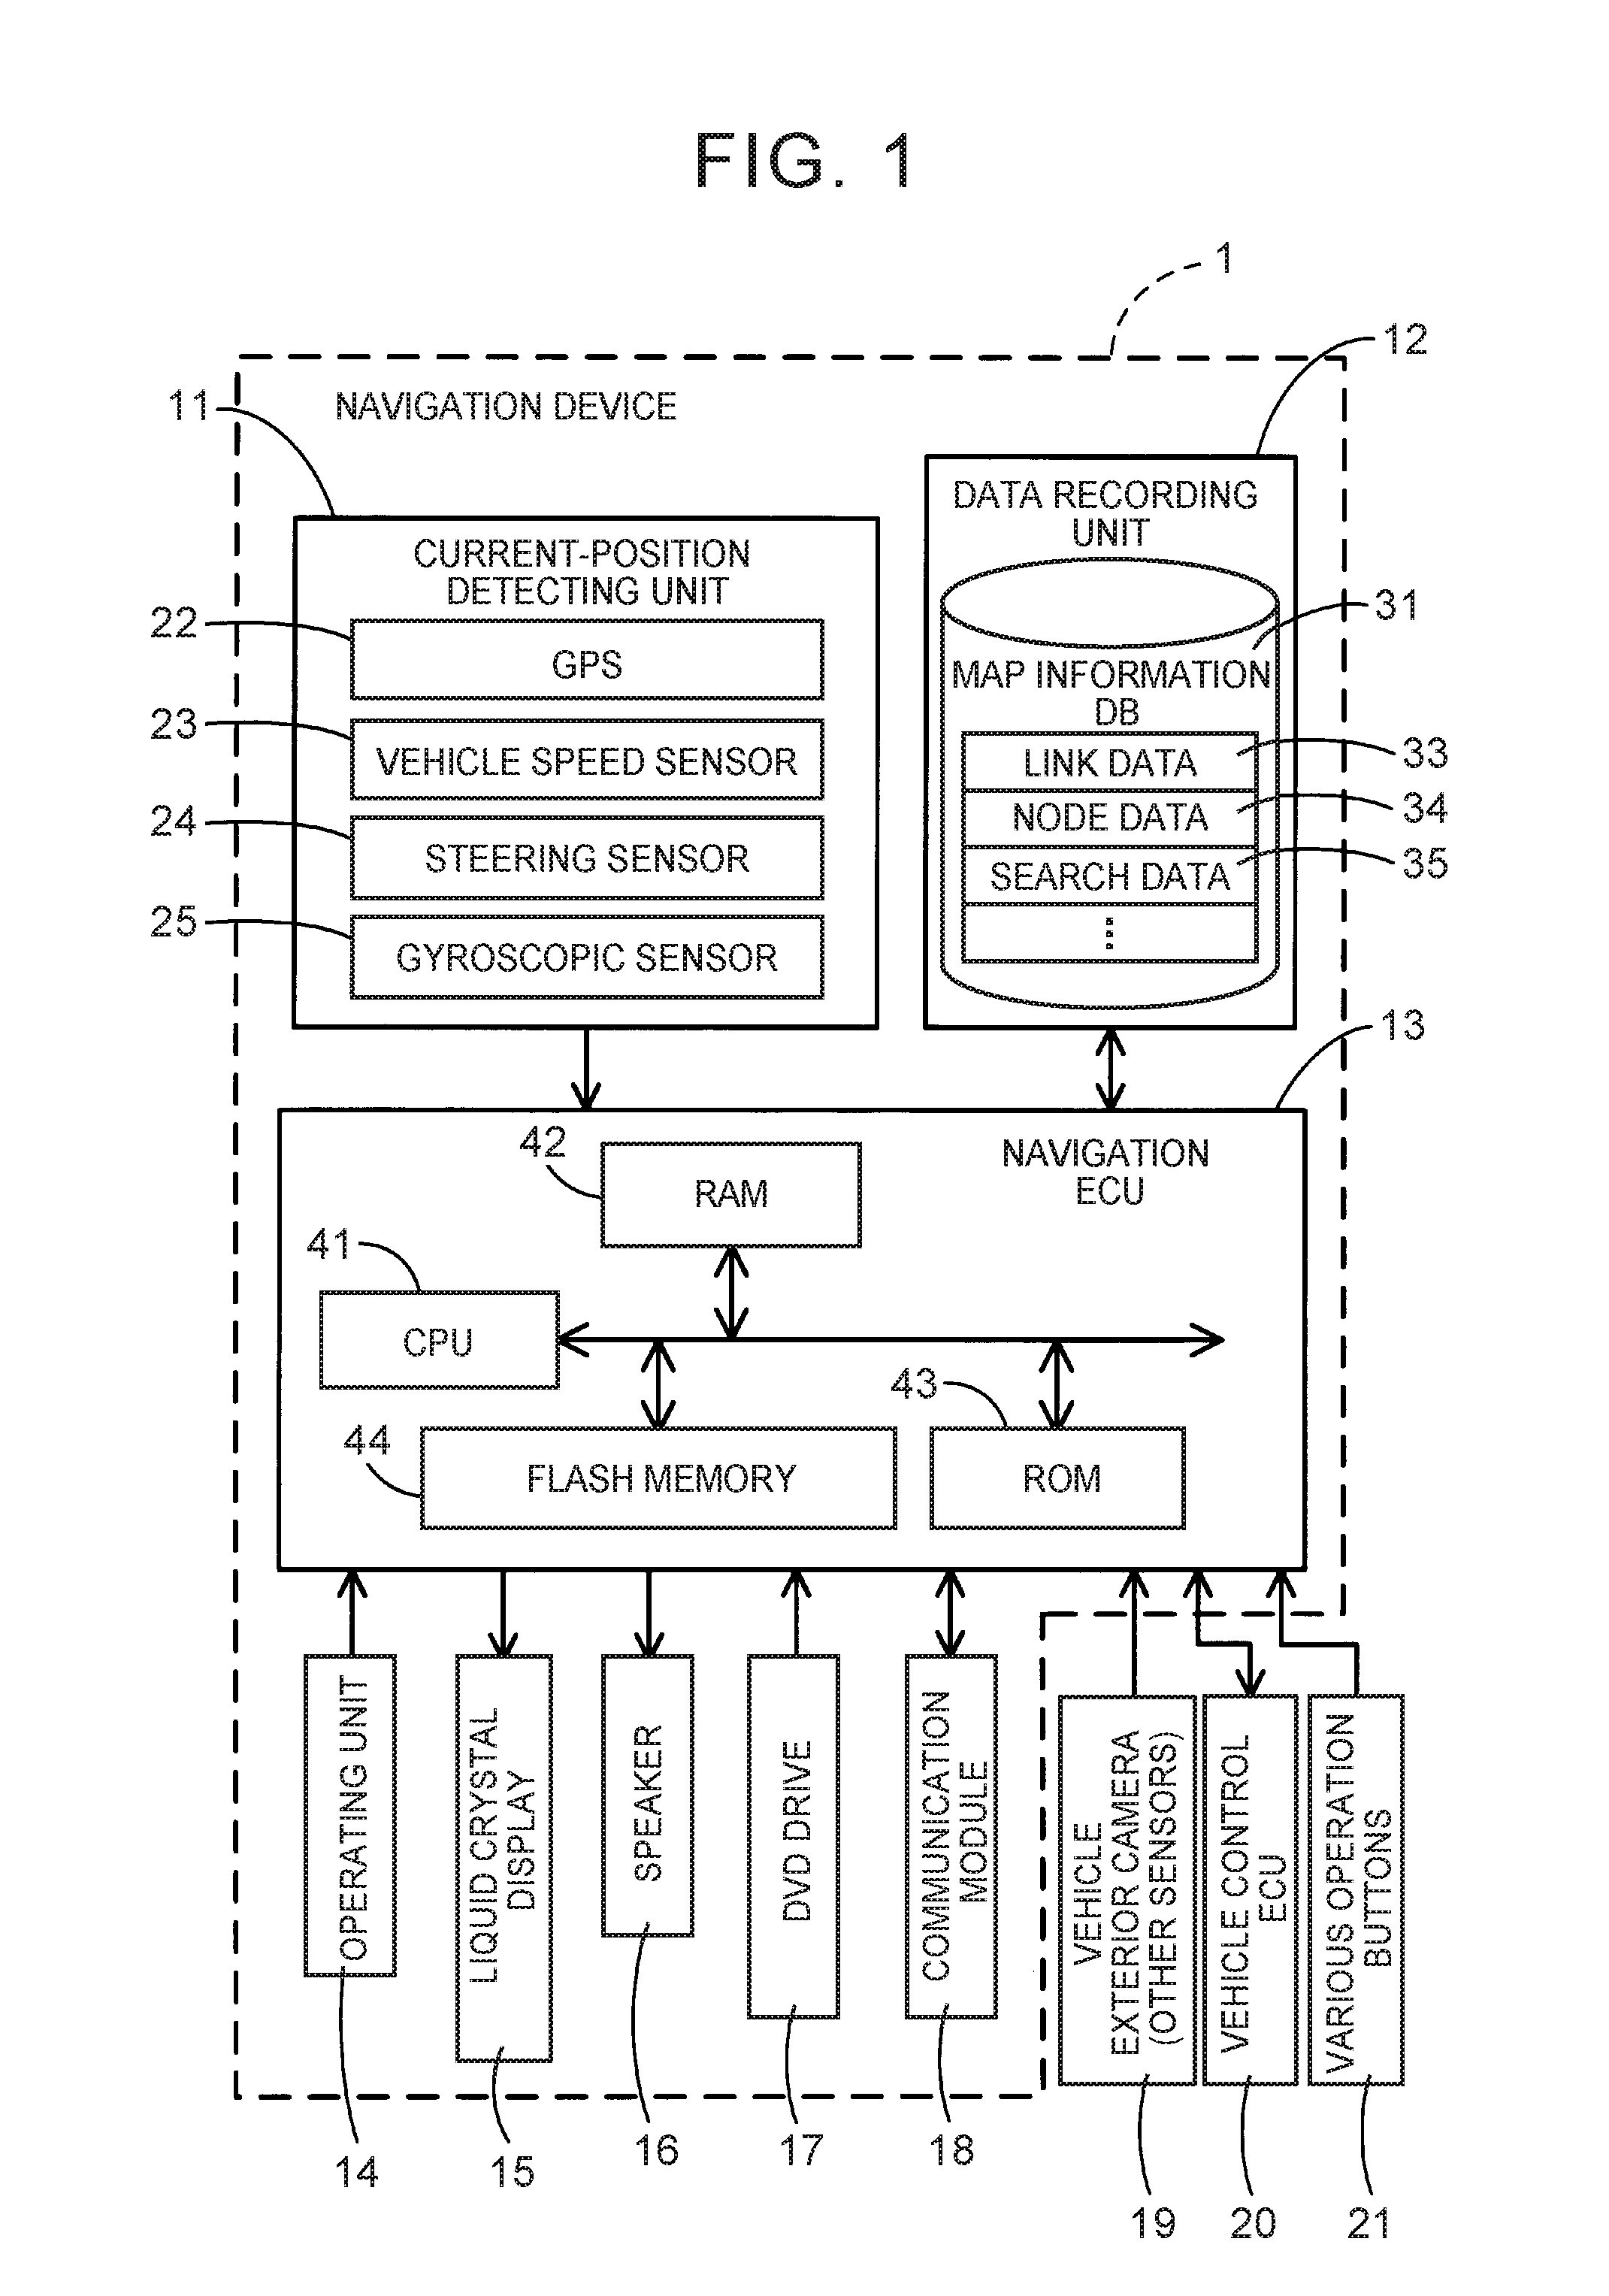 Route searching system, route searching method, and computer program